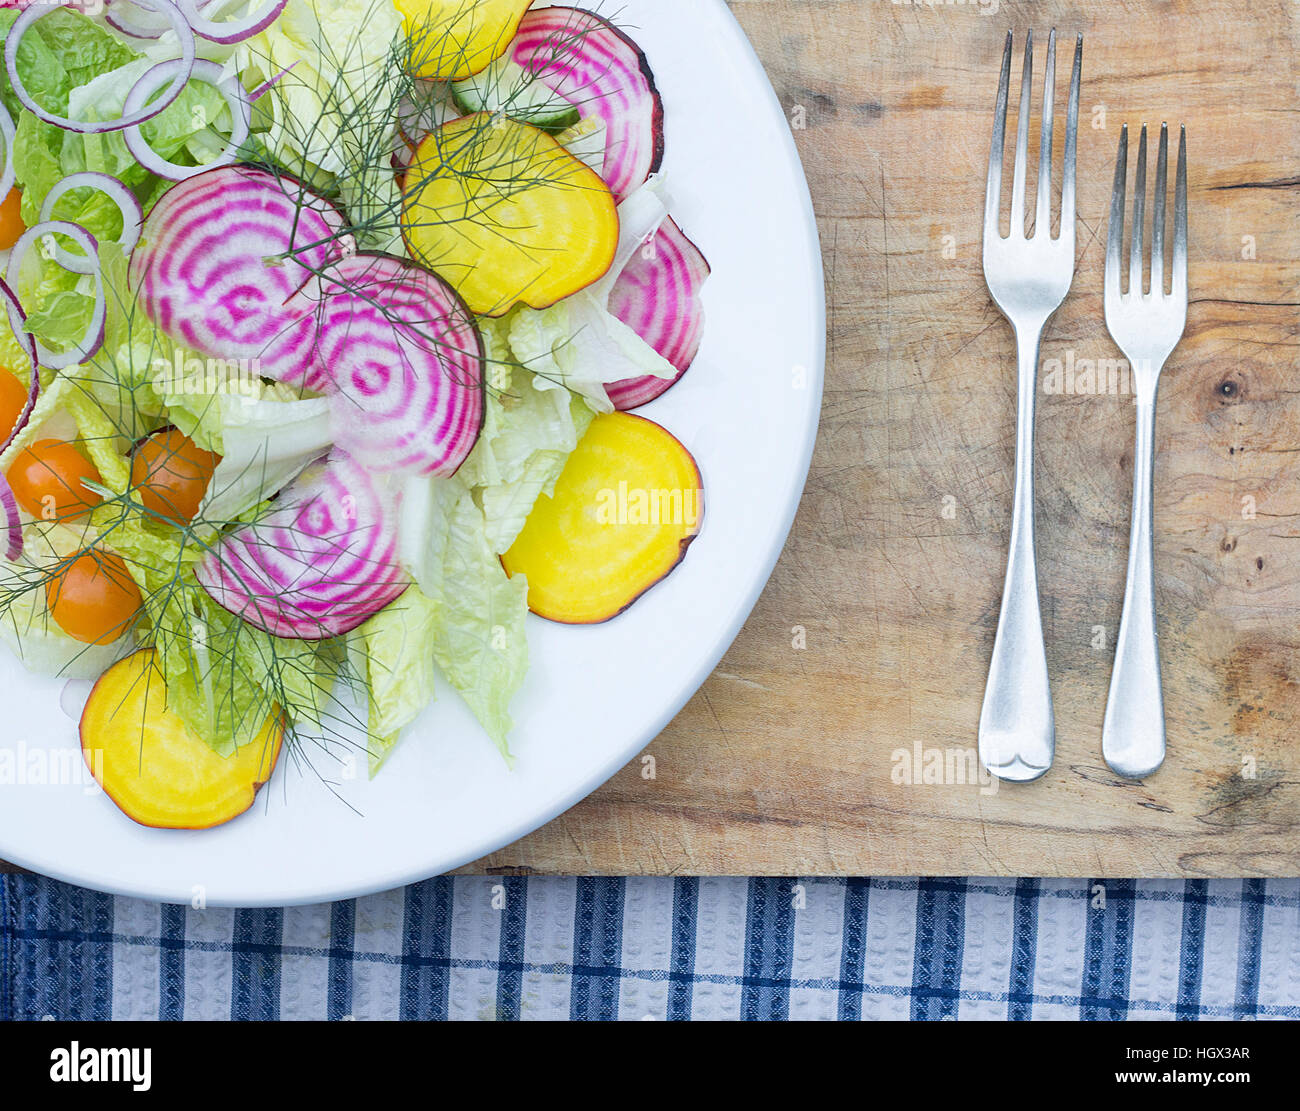 Beetroot Salad on white plate, wooden board and chequered cloth. With Antique cutlery. Stock Photo